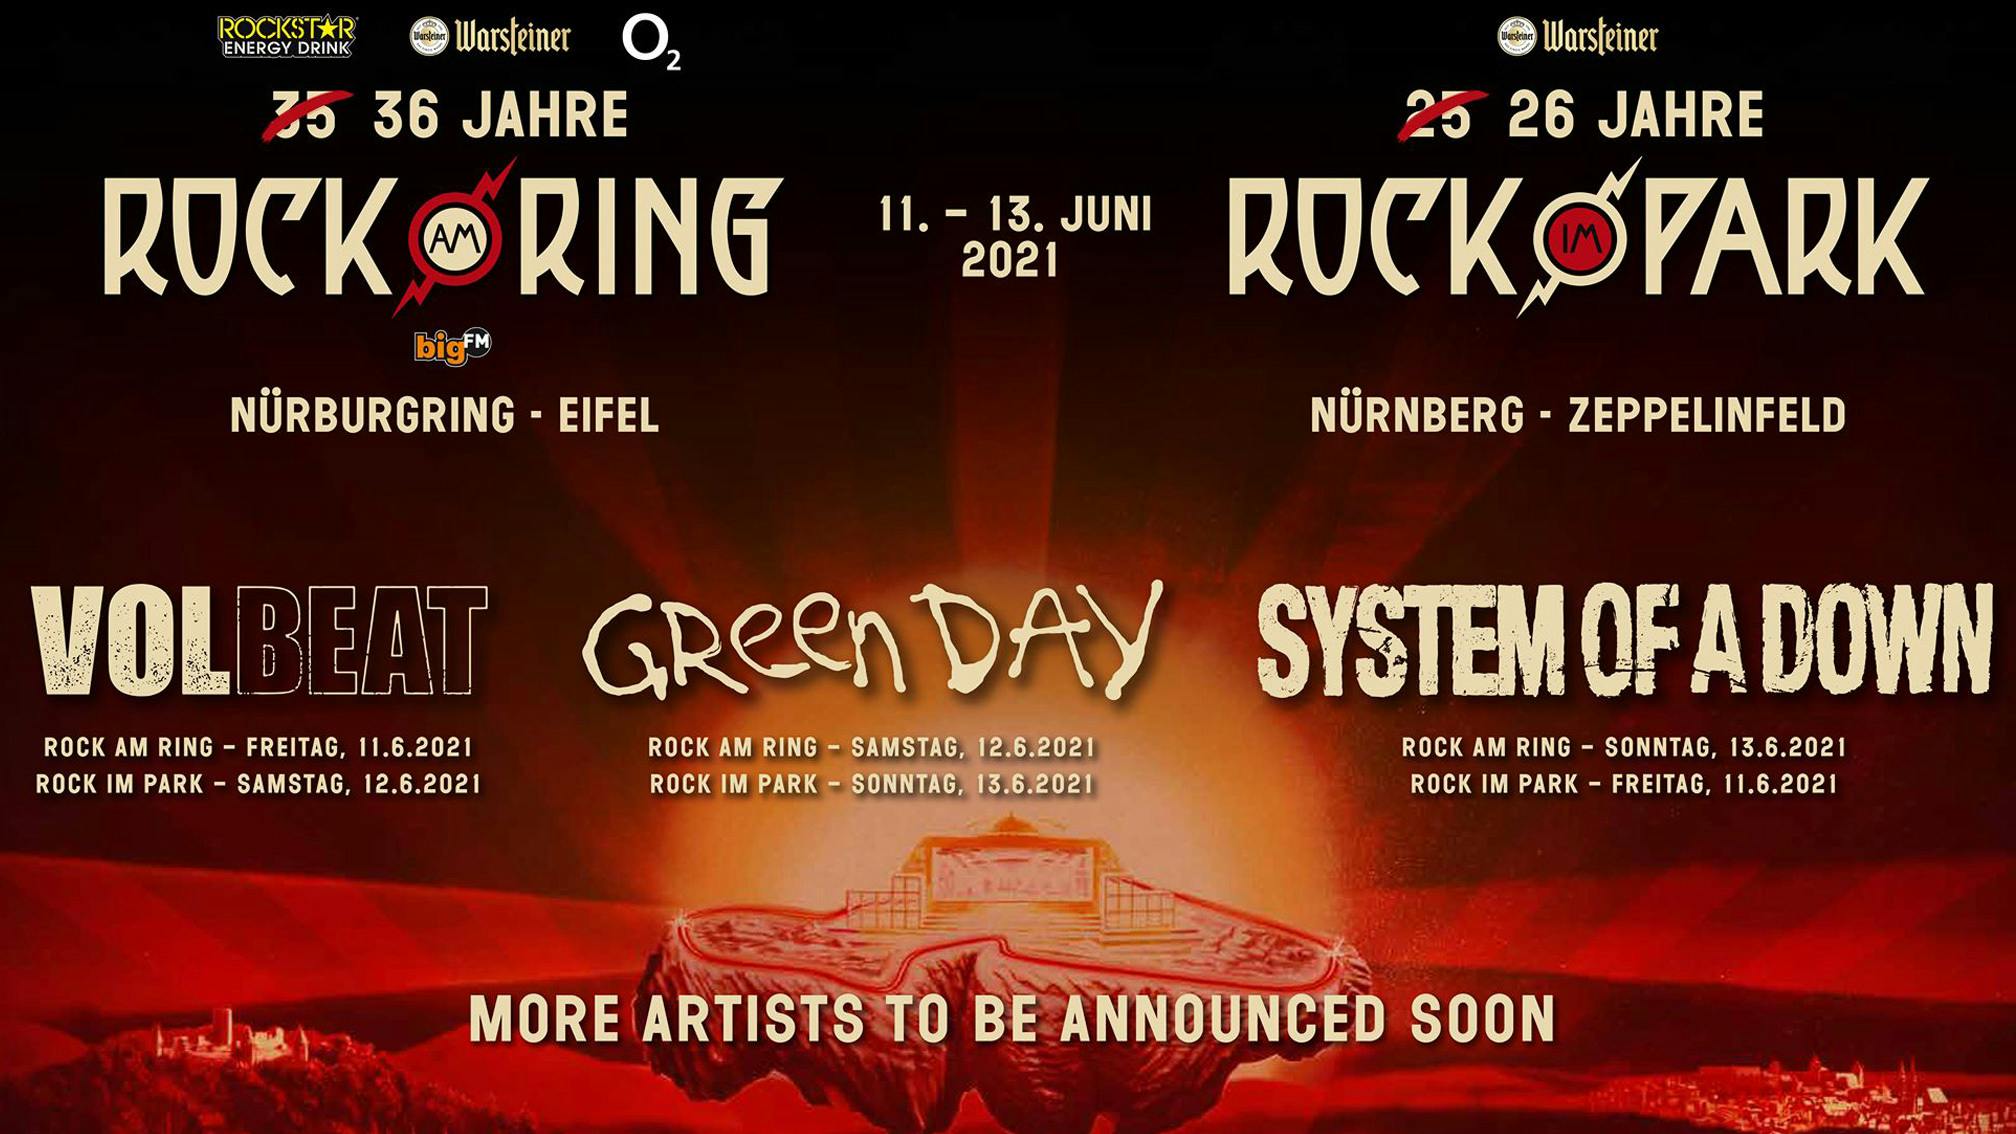 Green Day, System Of A Down And Volbeat To Headline Rock Am Ring / Rock Im Park 2021